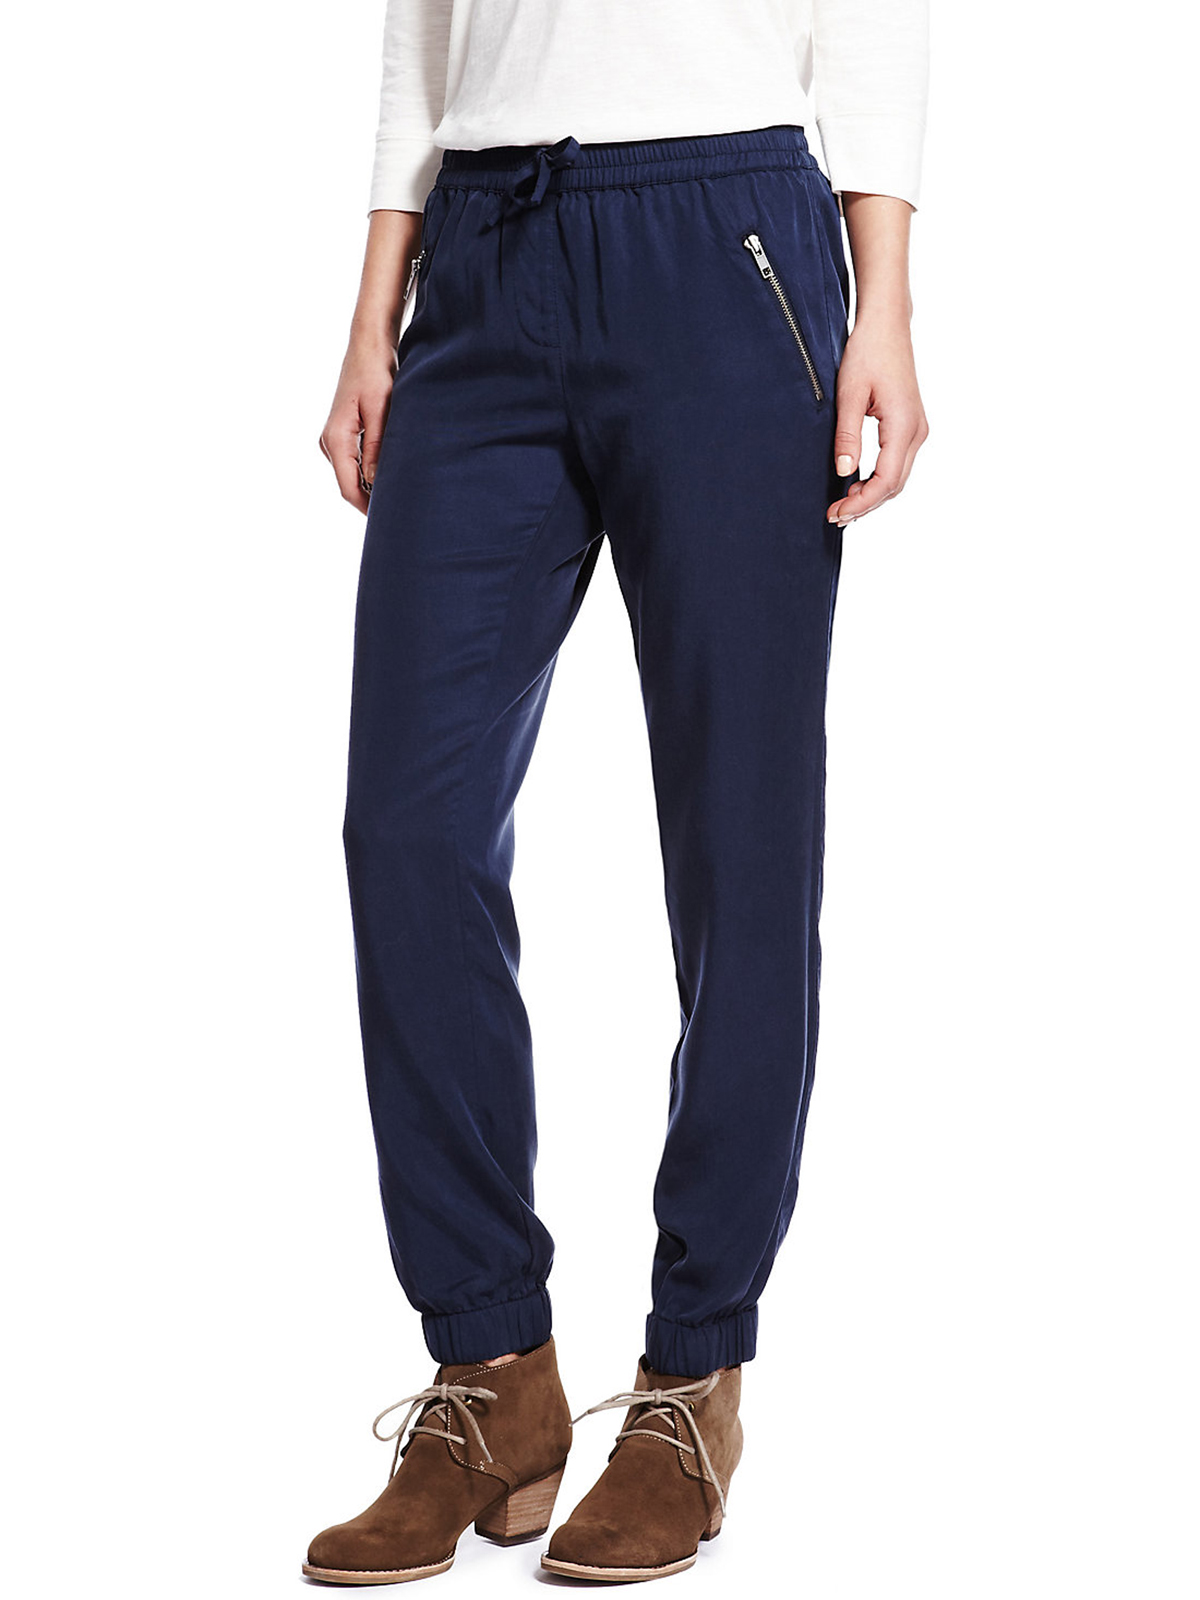 Marks and Spencer - - M&5 AIRFORCE-BLUE Cuffed Hem Joggers - Size 8 to 12